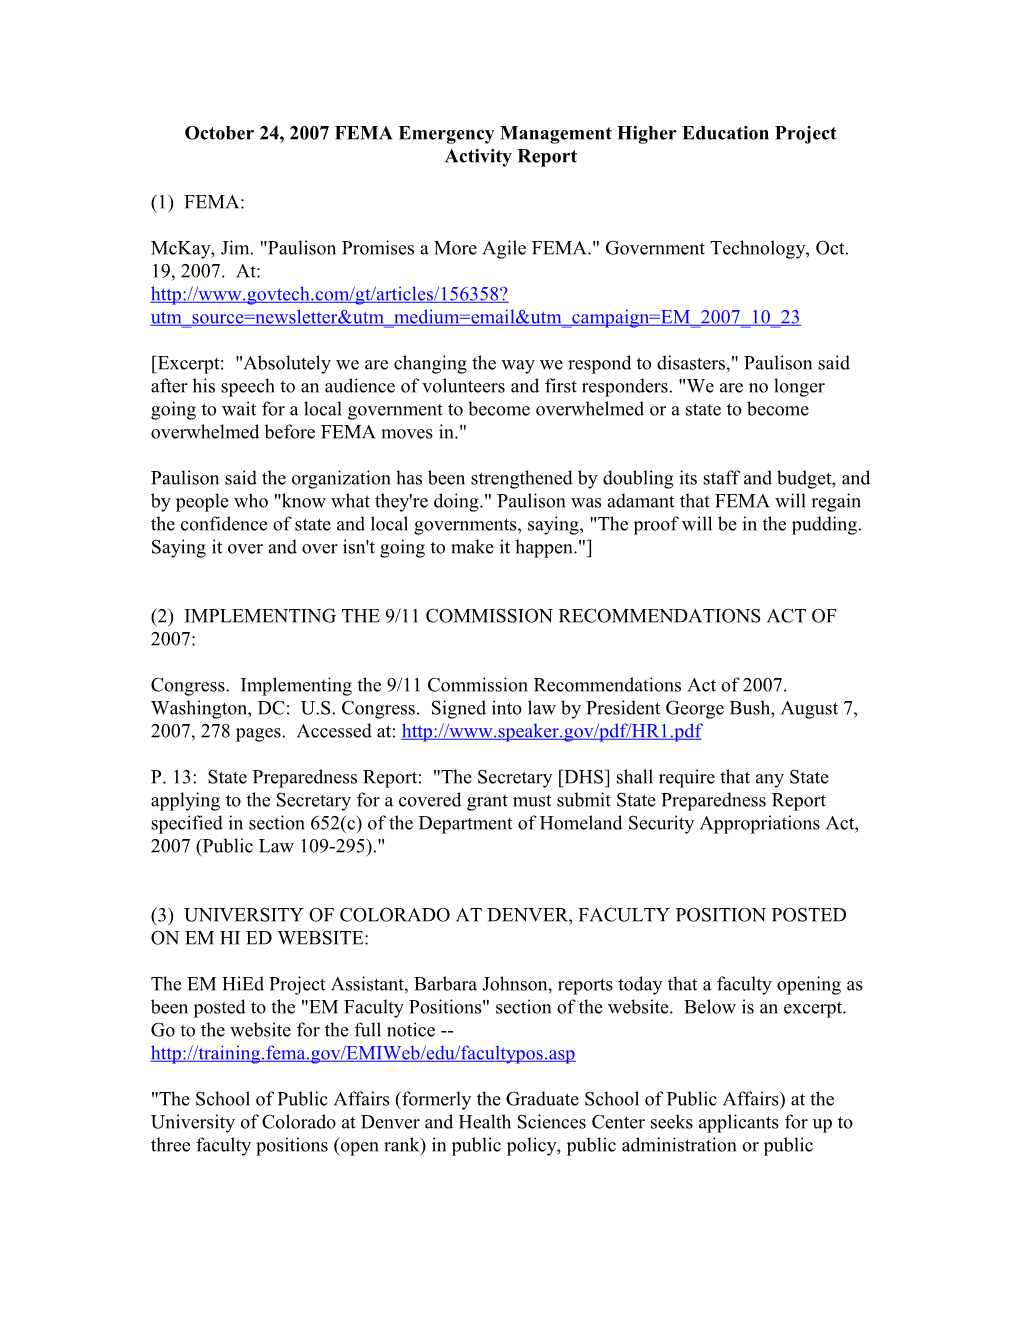 October 24, 2007 FEMA Emergency Management Higher Education Project Activity Report